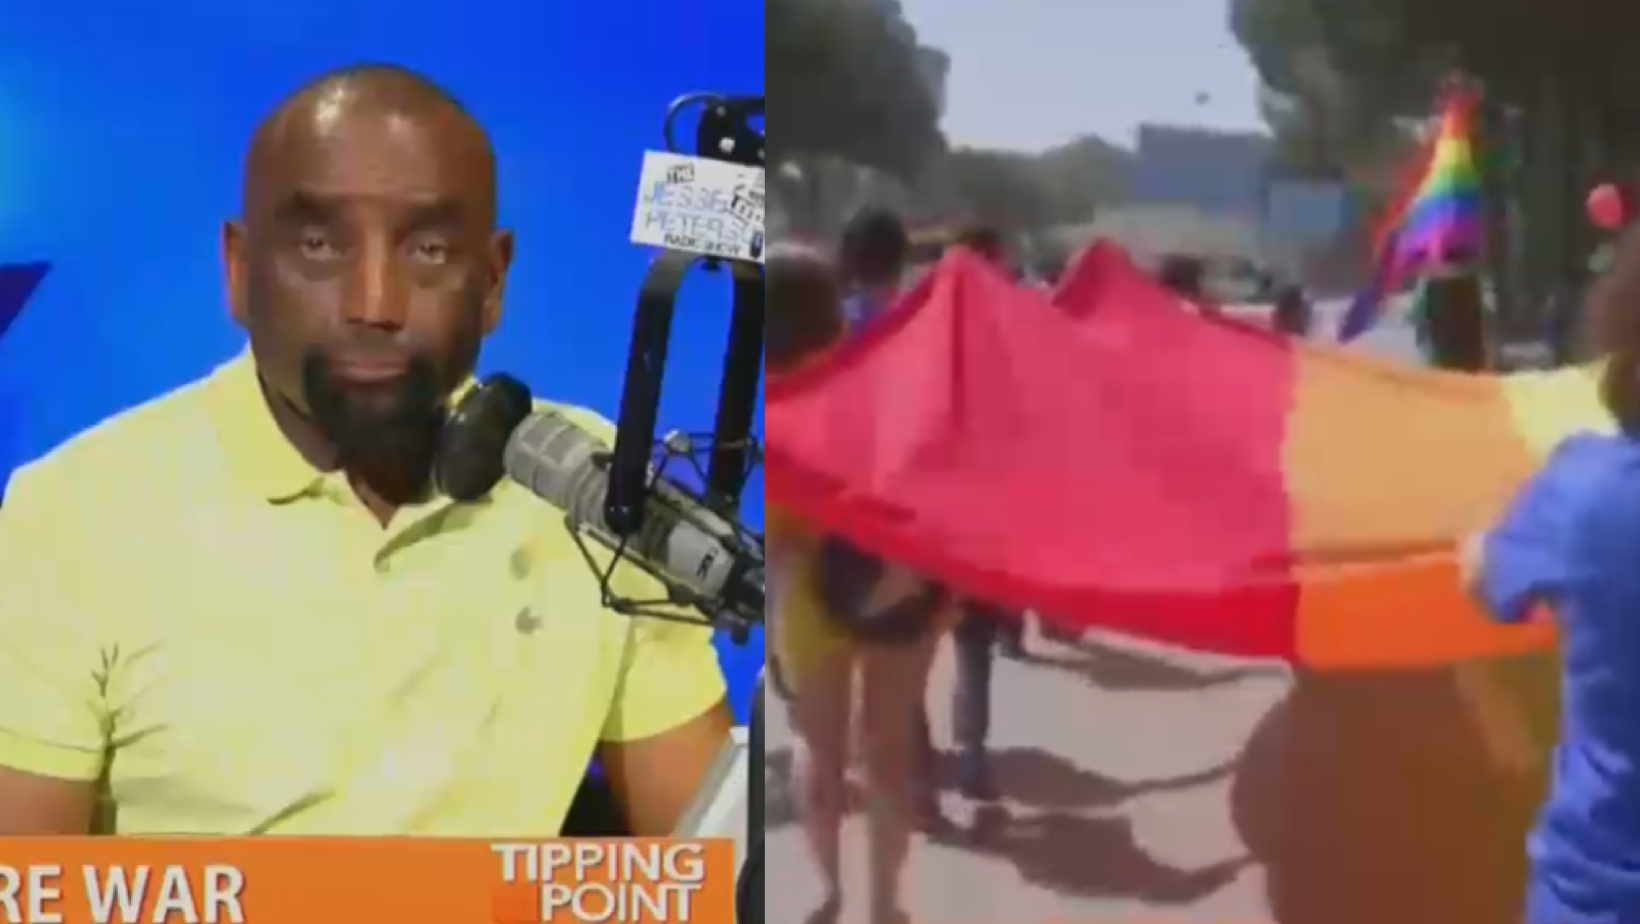 Jesse Lee Peterson appearing on "Tipping Point" on the One America News Network